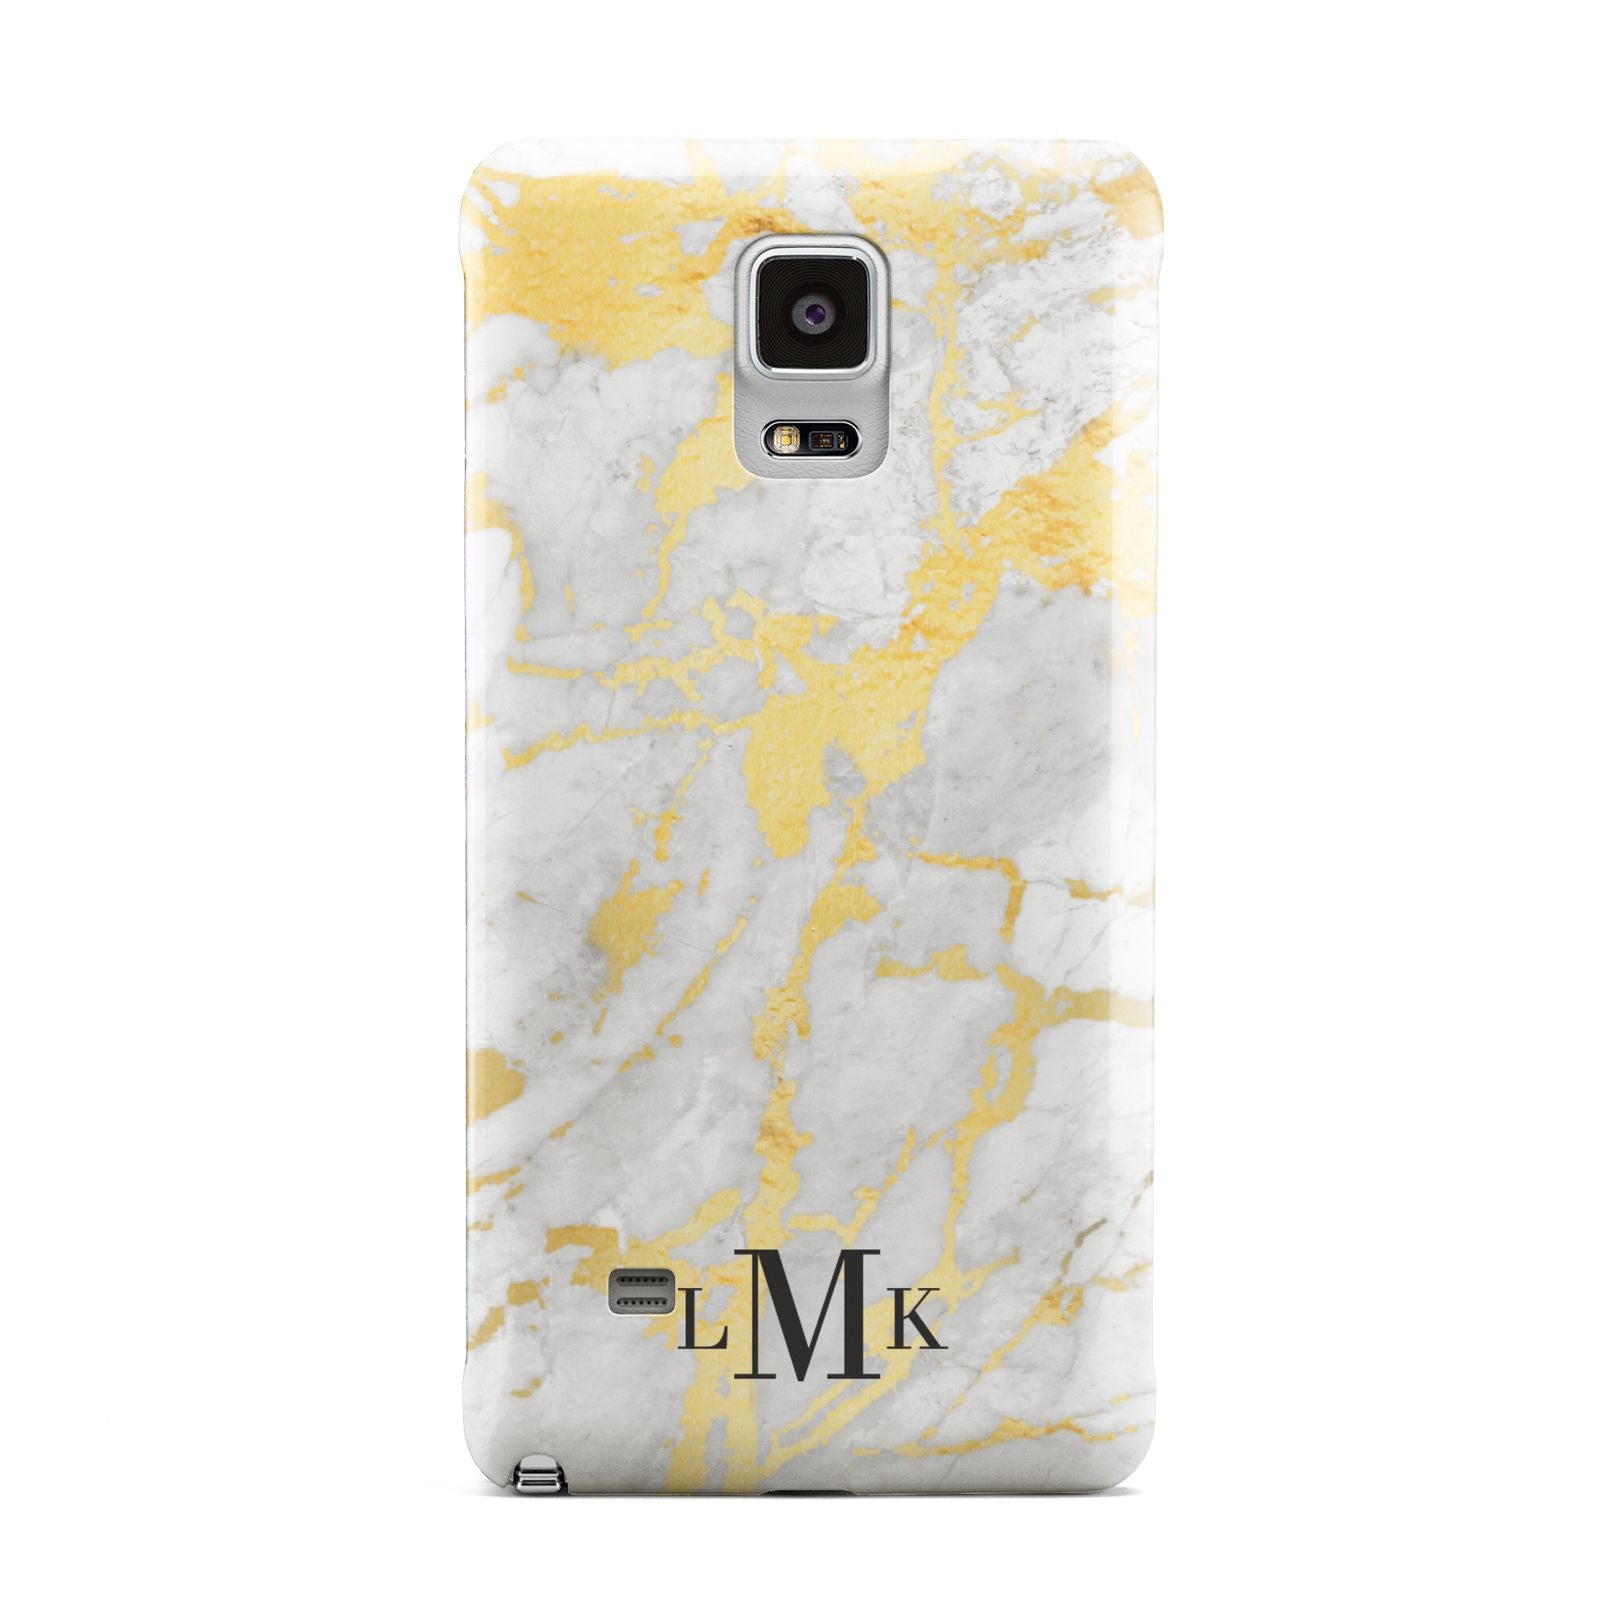 Gold Marble Initials Customised Samsung Galaxy Note 4 Case